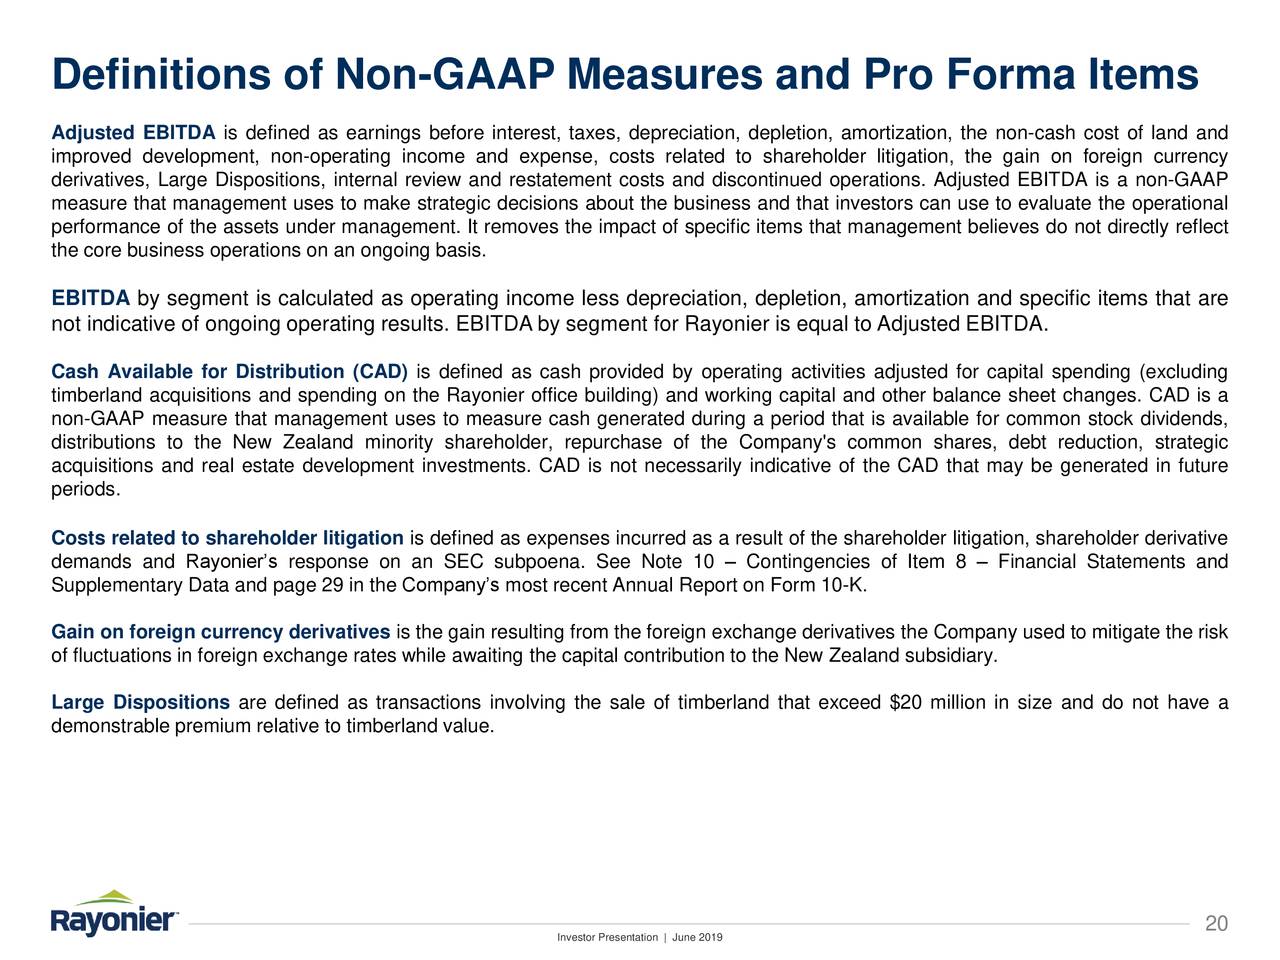 Definitions of Non-GAAP Measures and Pro Forma Items